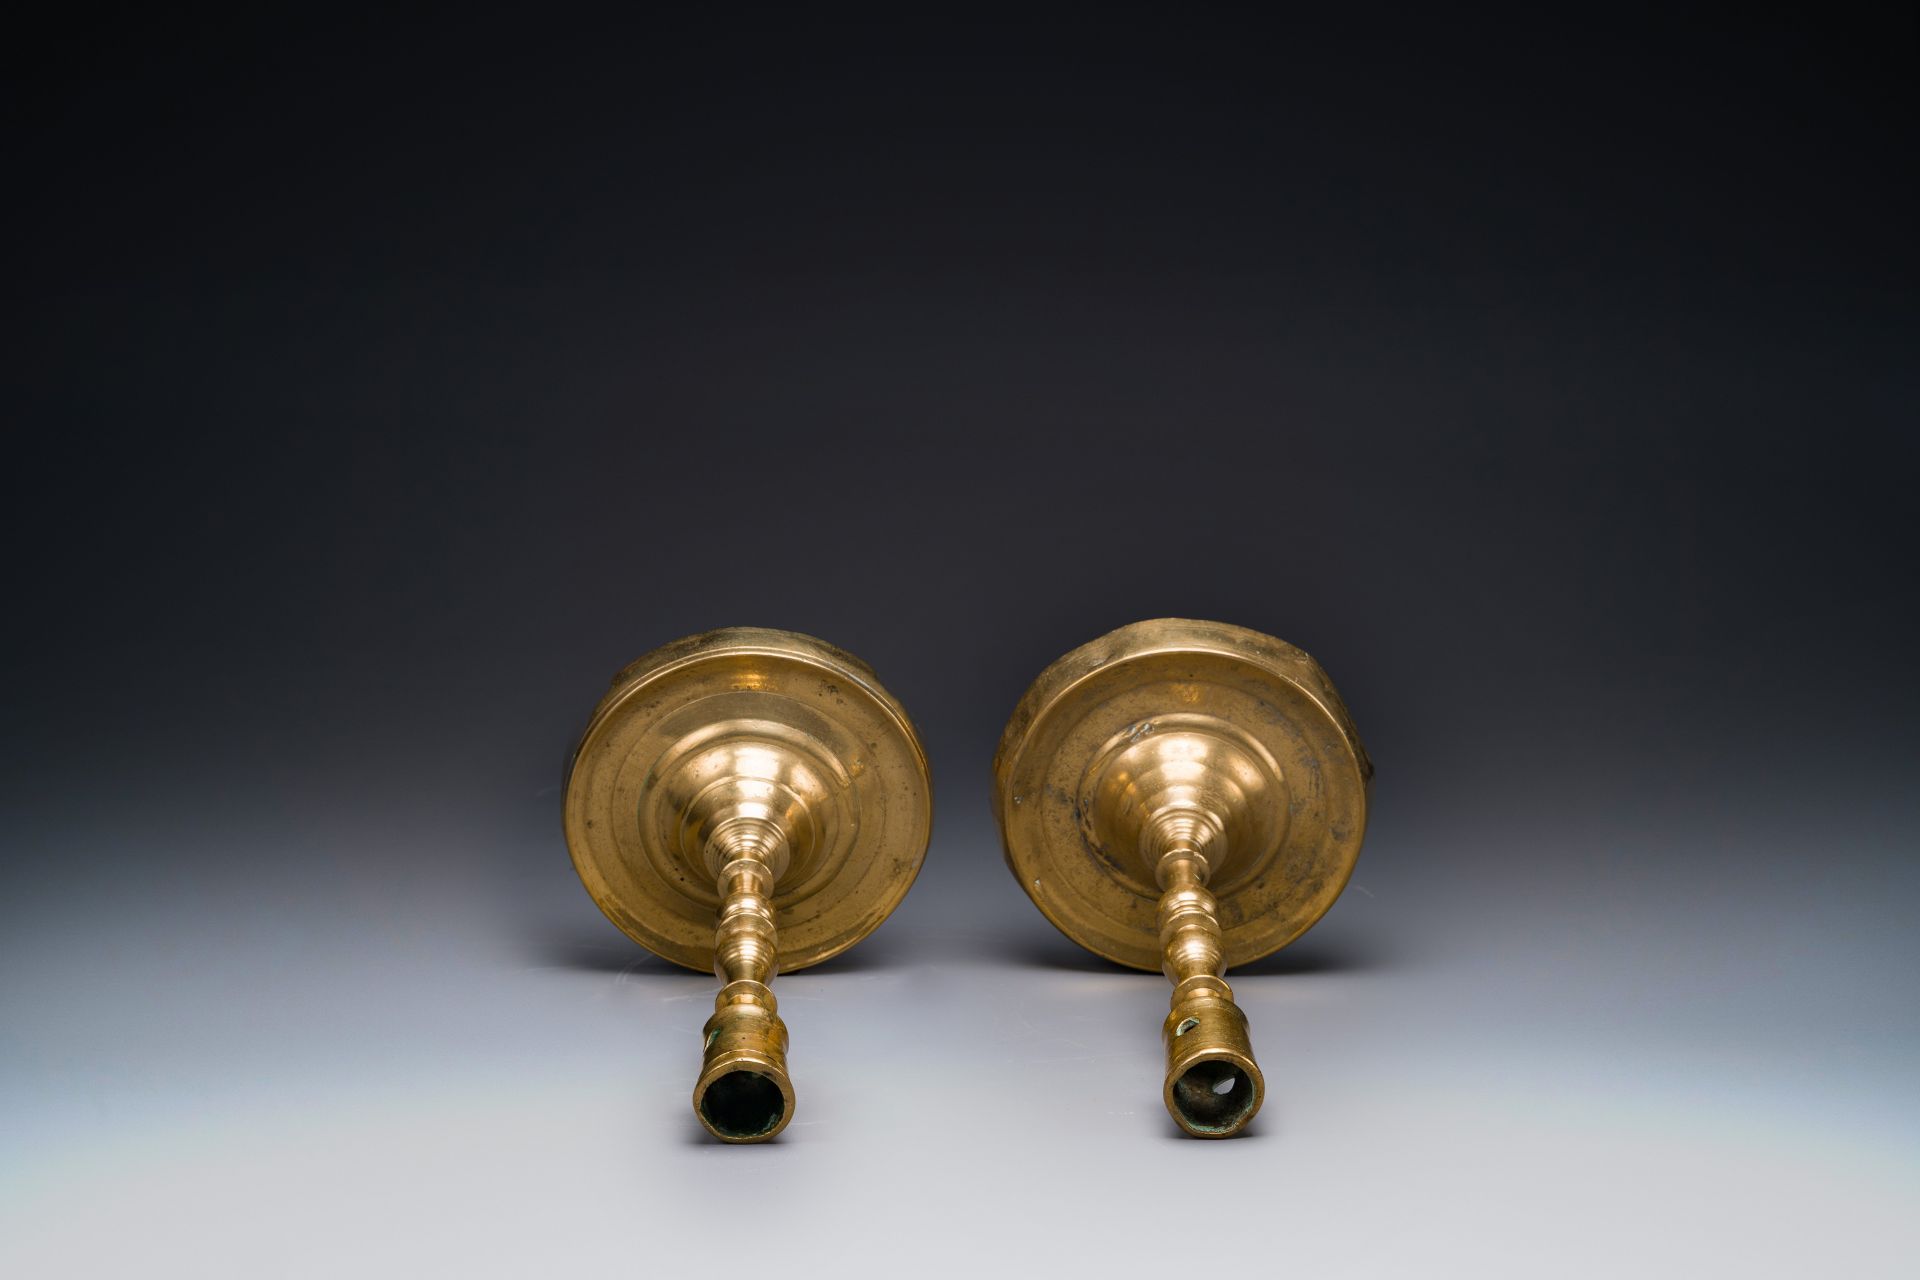 A pair of Flemish or Dutch knotted bronze candlesticks, 16th C. - Image 5 of 8